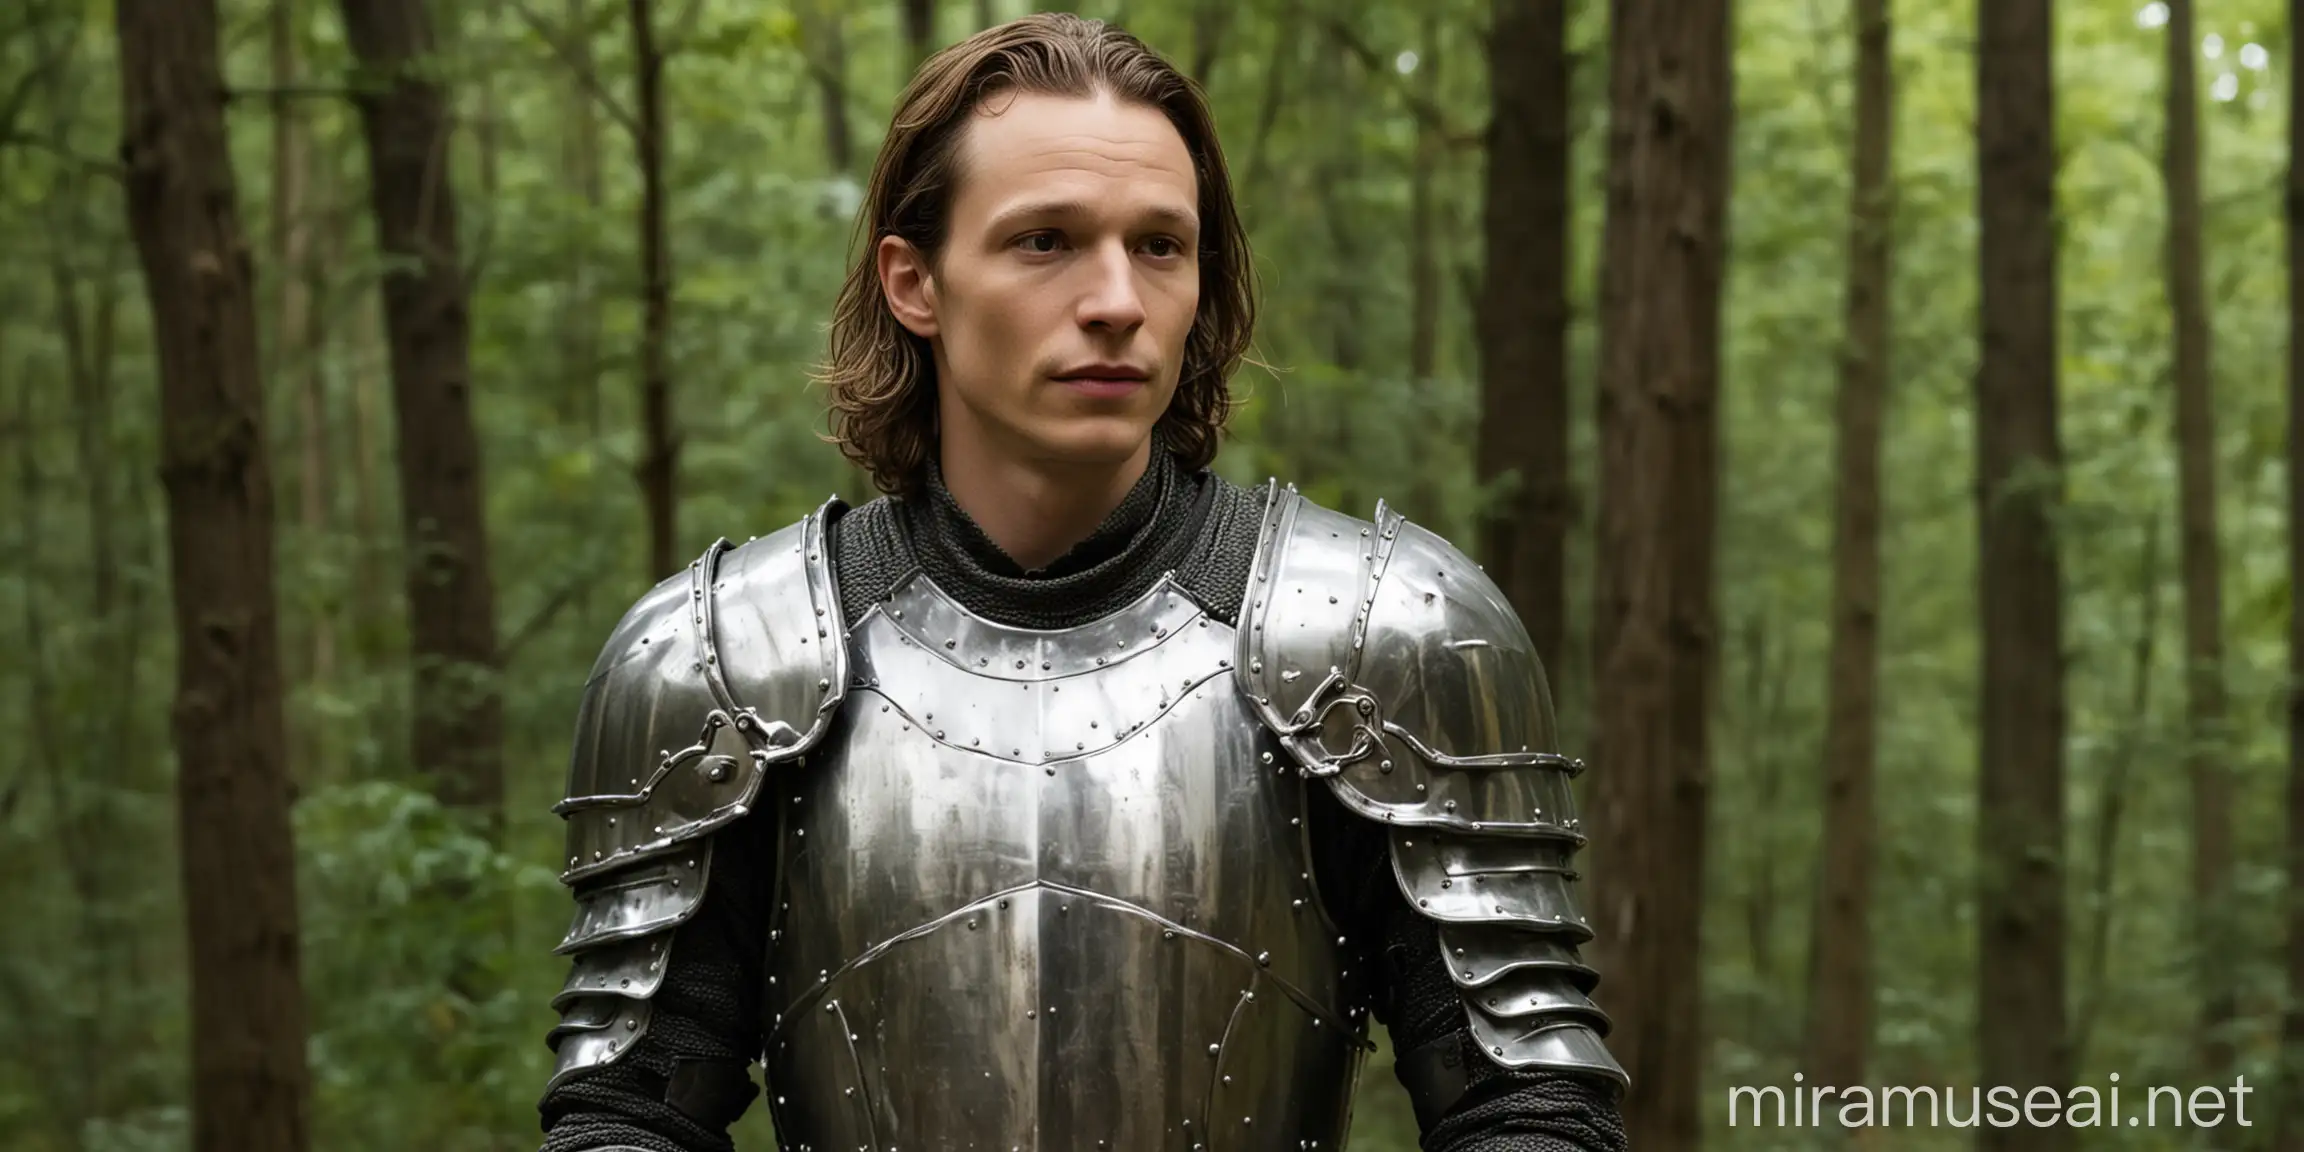 Actor Mike Faist in Knightly Armor in Enchanted Forest Setting